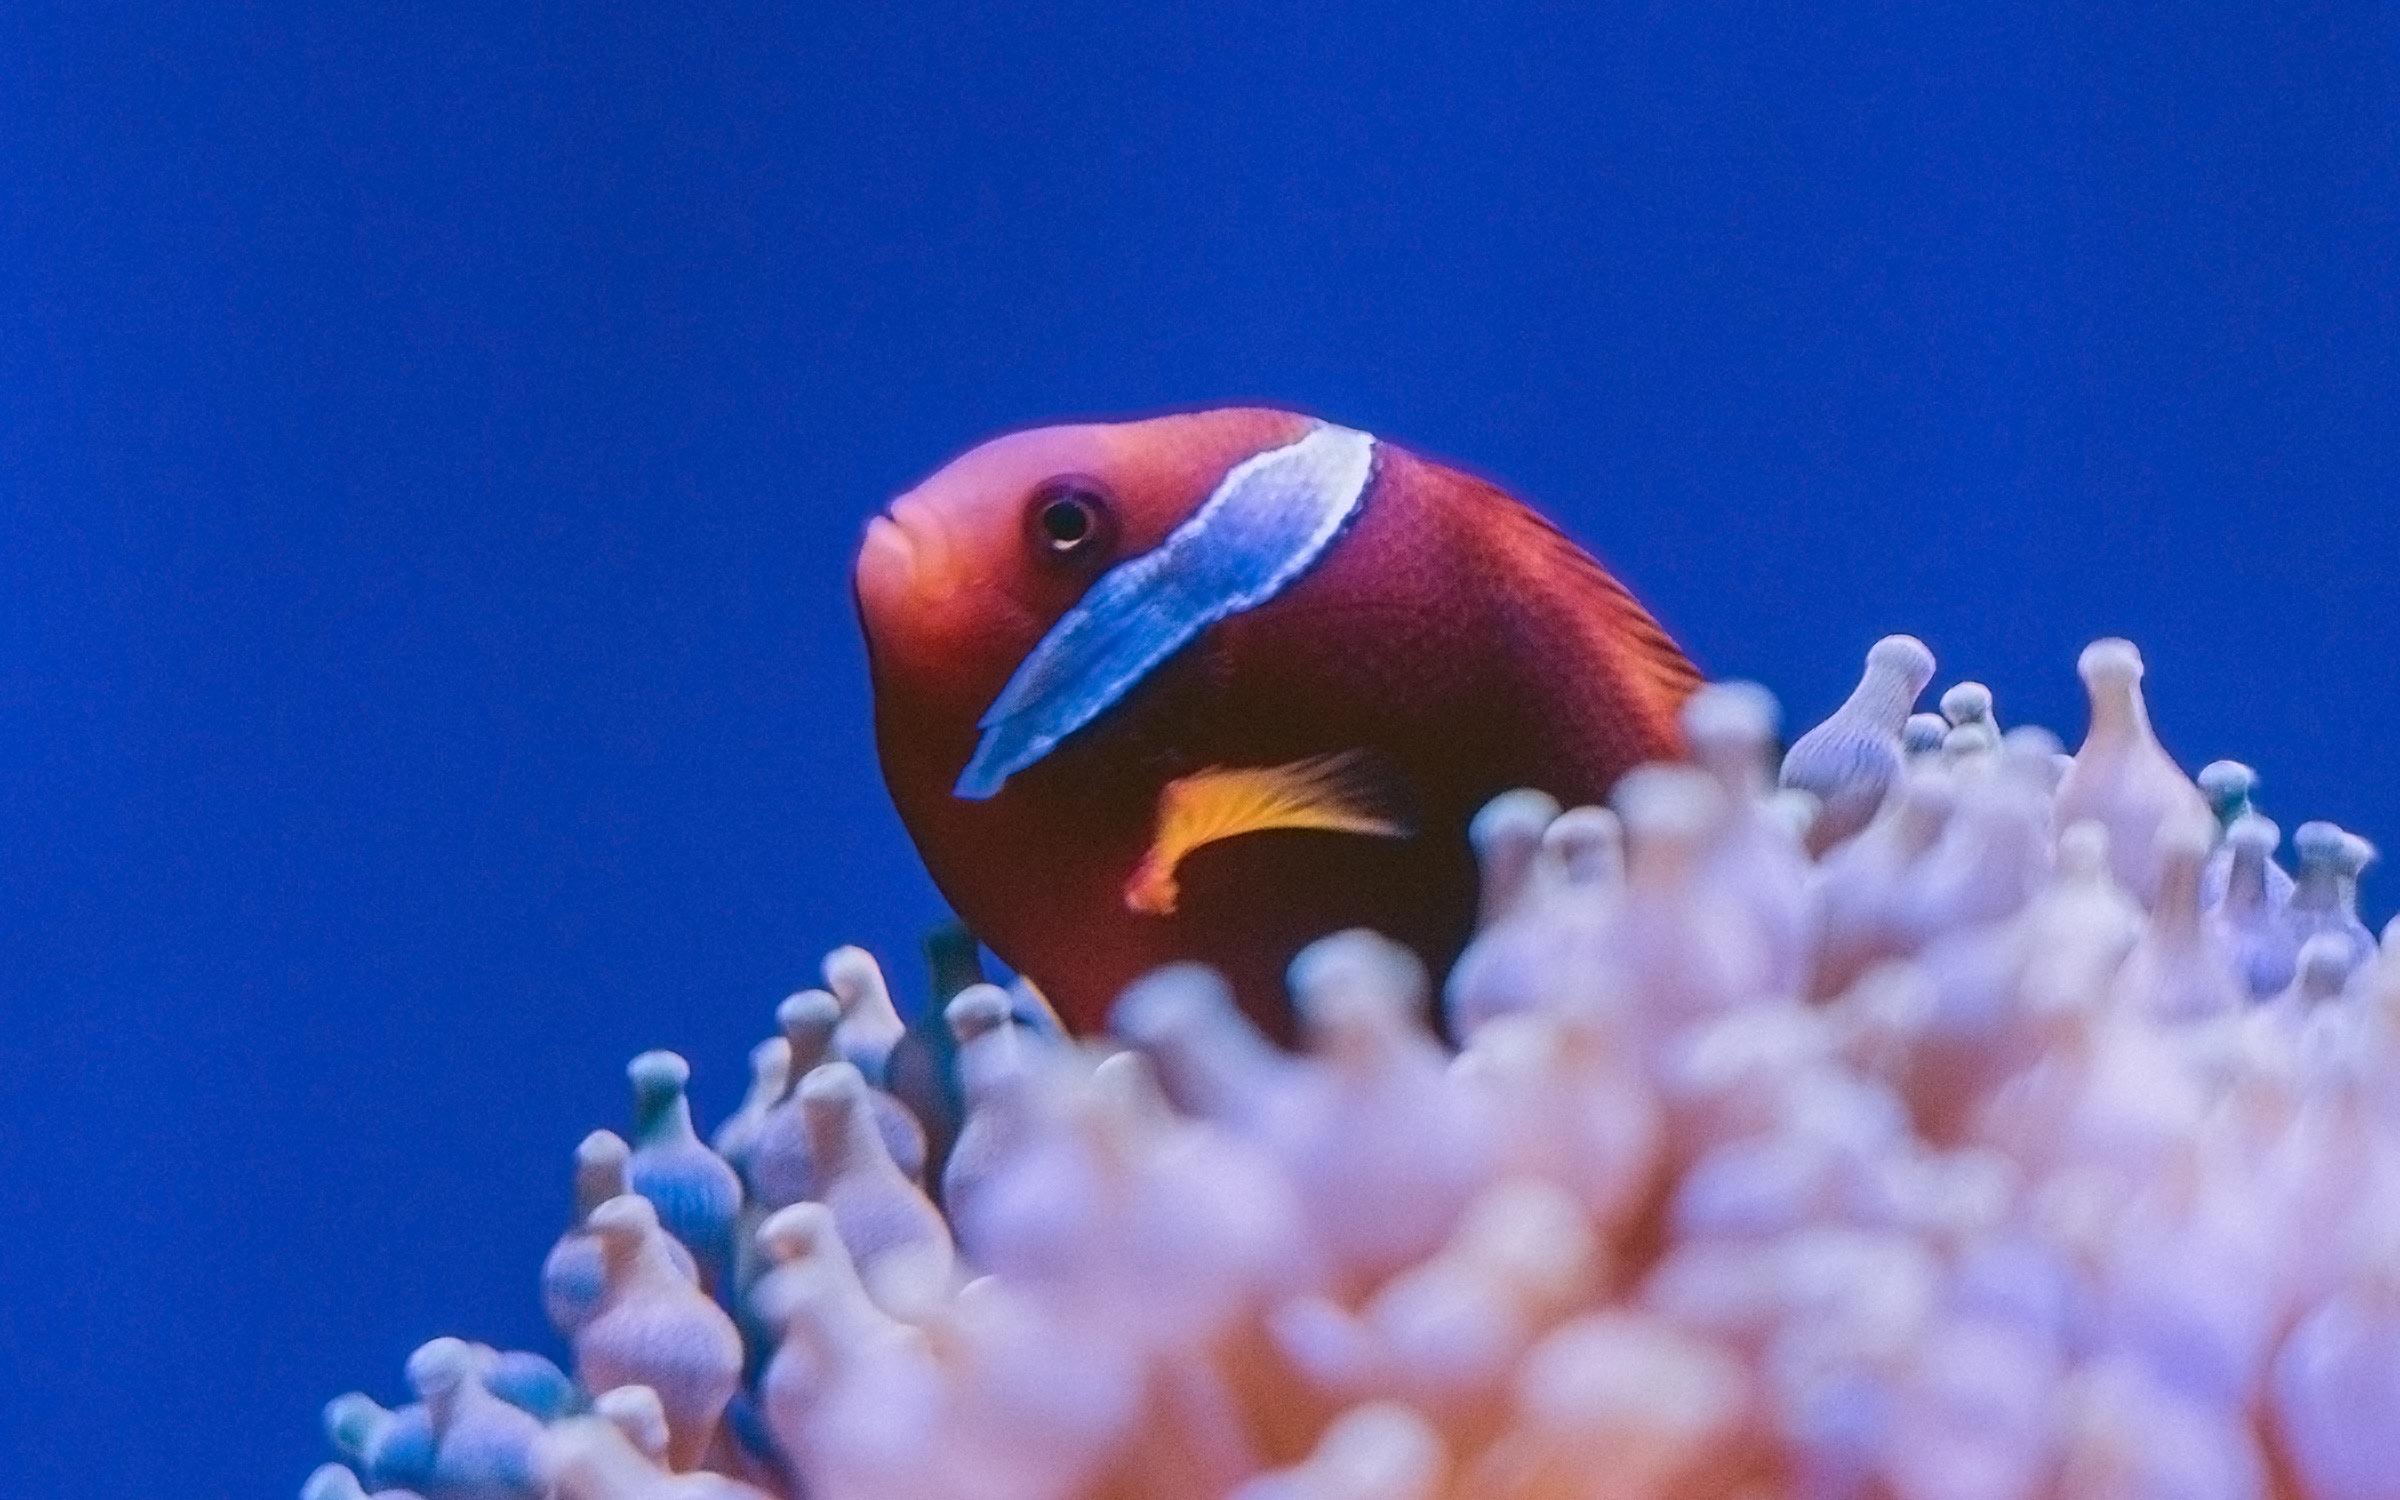 https://tayeblog.net/images/yootheme/science-post-keep-your-anemones-close.jpg